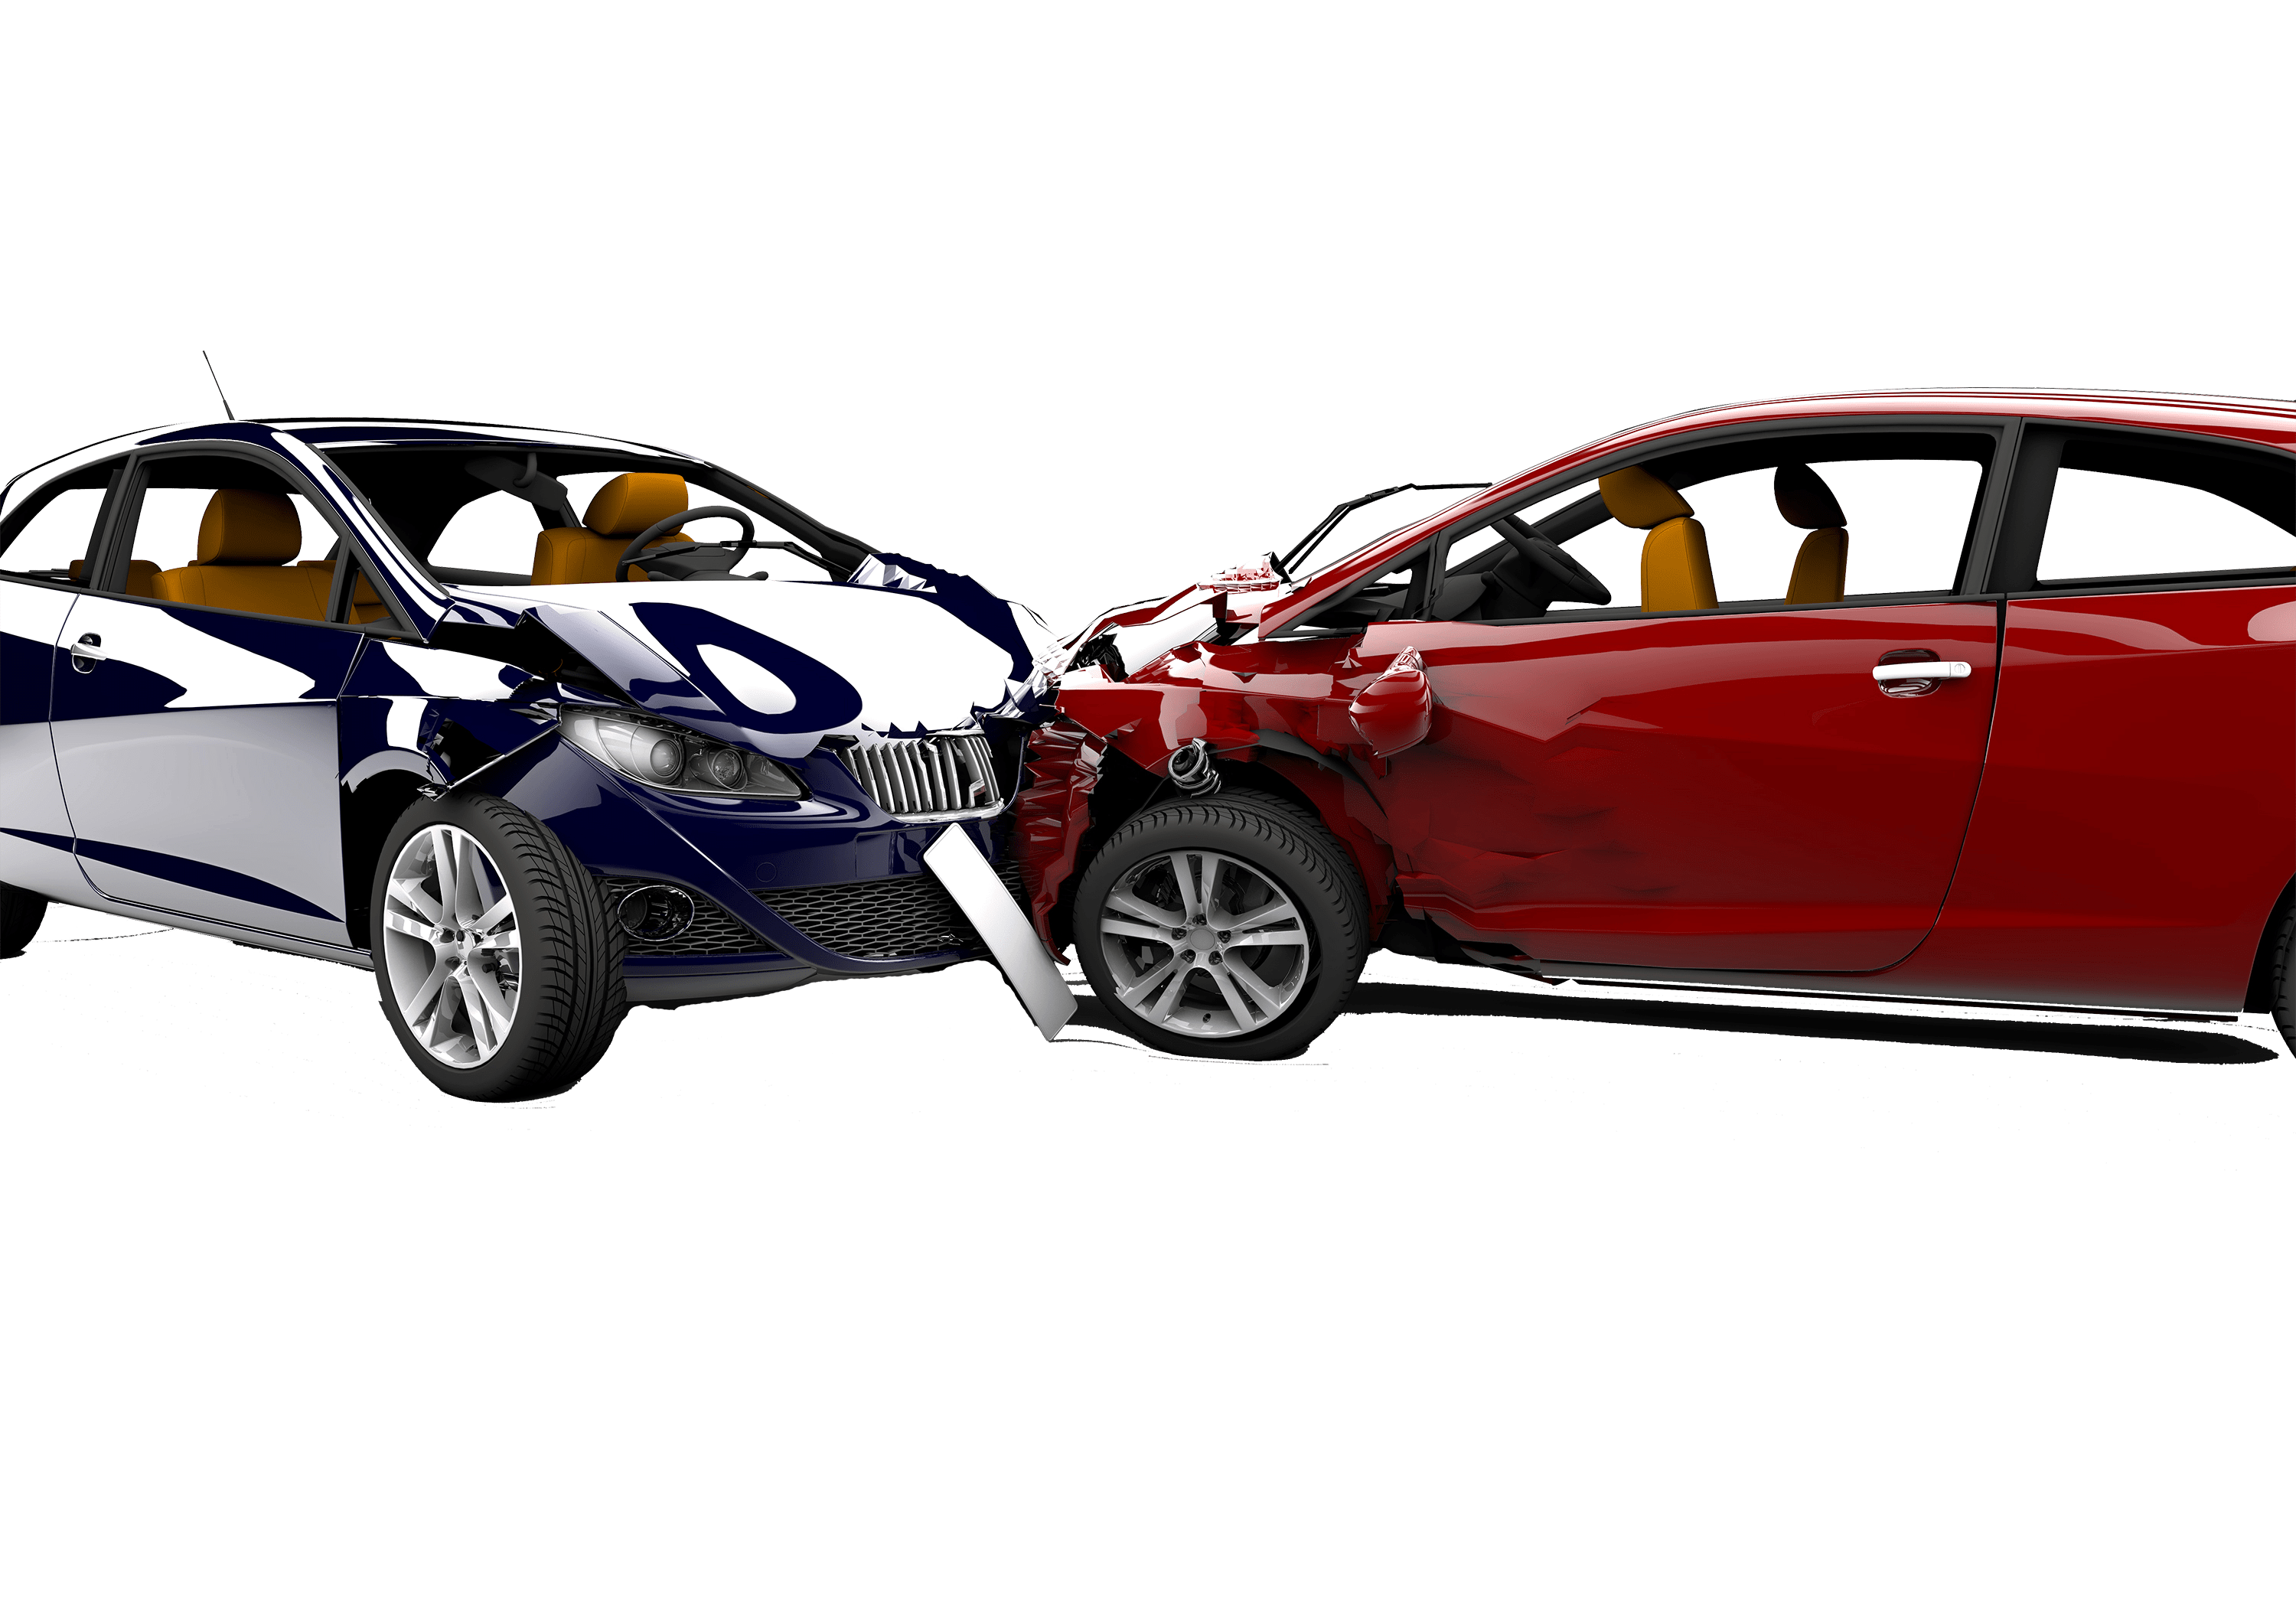 Car Collision PNG HD